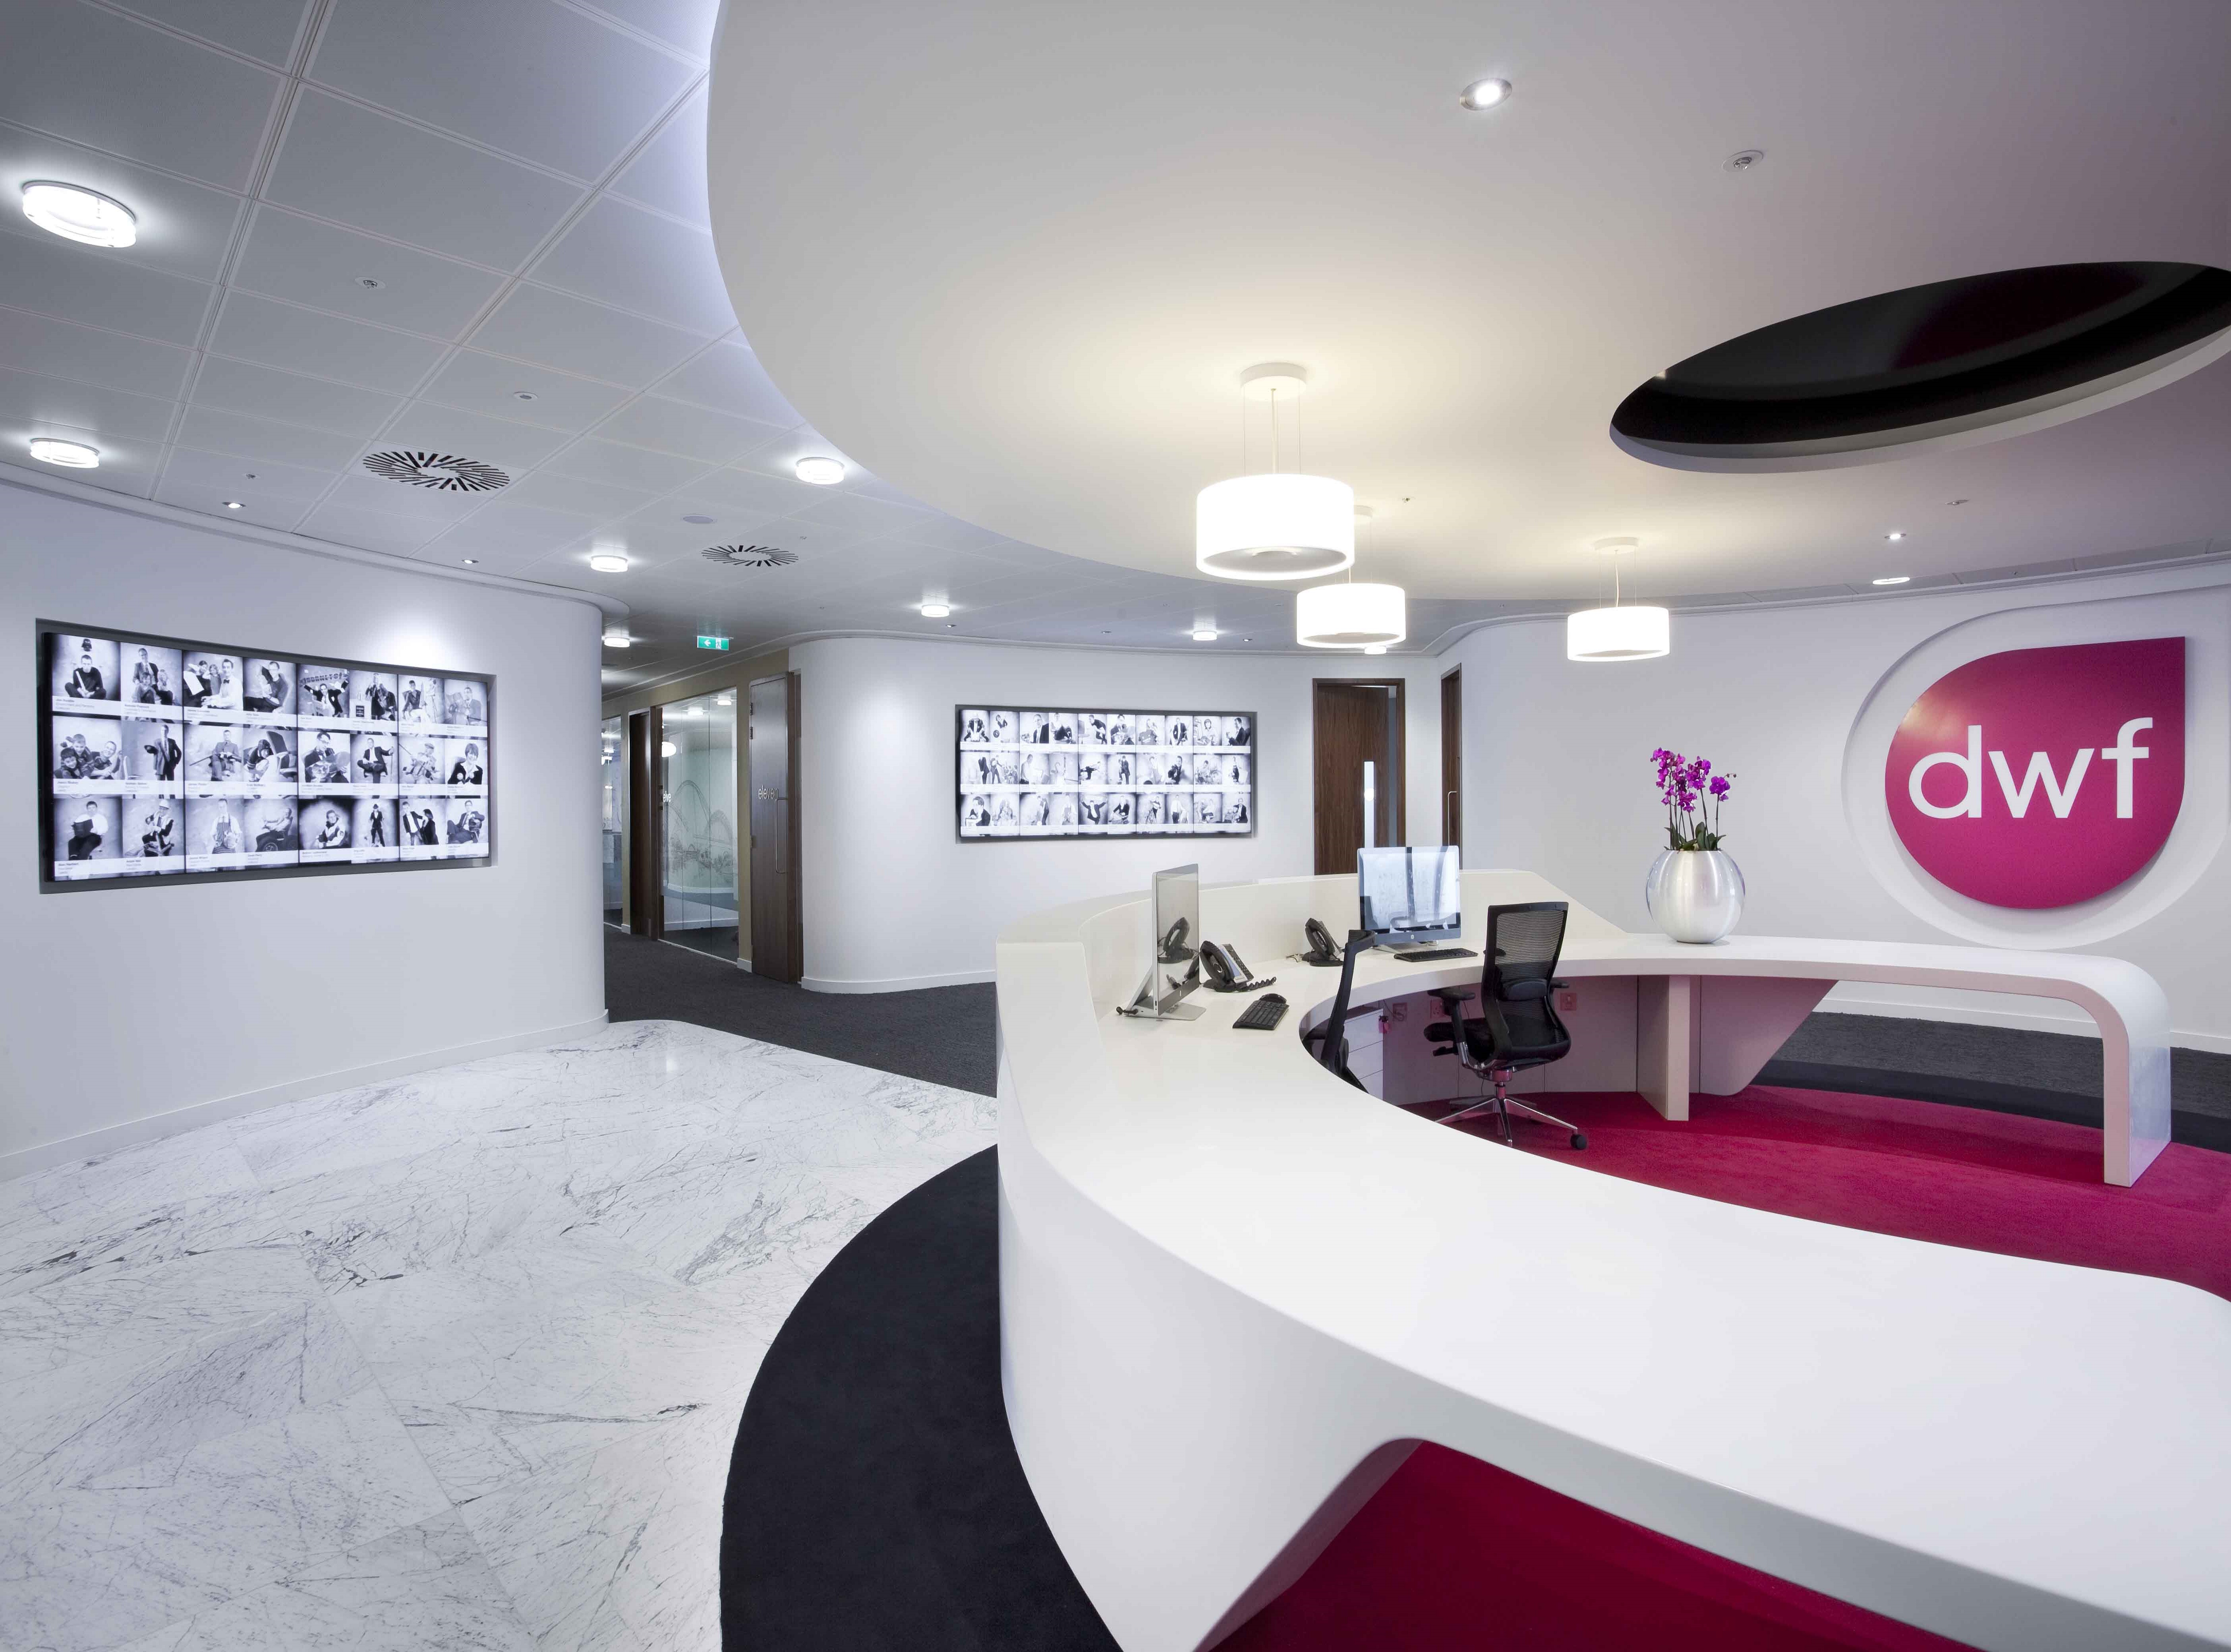 Image of interior of DWF office. Lots of white curved desks and pink DWF logo on the wall.